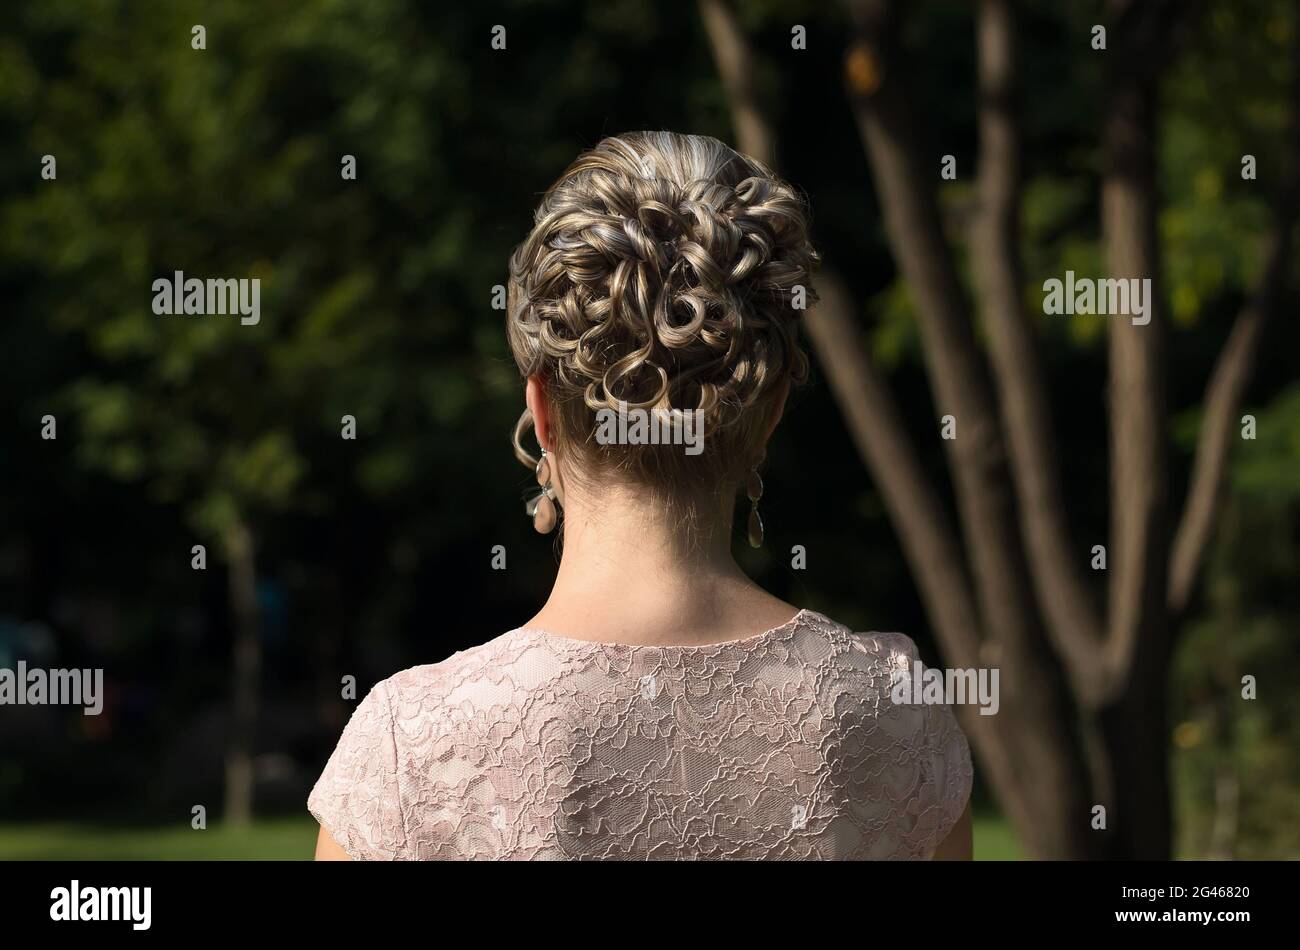 Girl from the back close-up with a beautiful hairstyle on her head, among the green trees Stock Photo